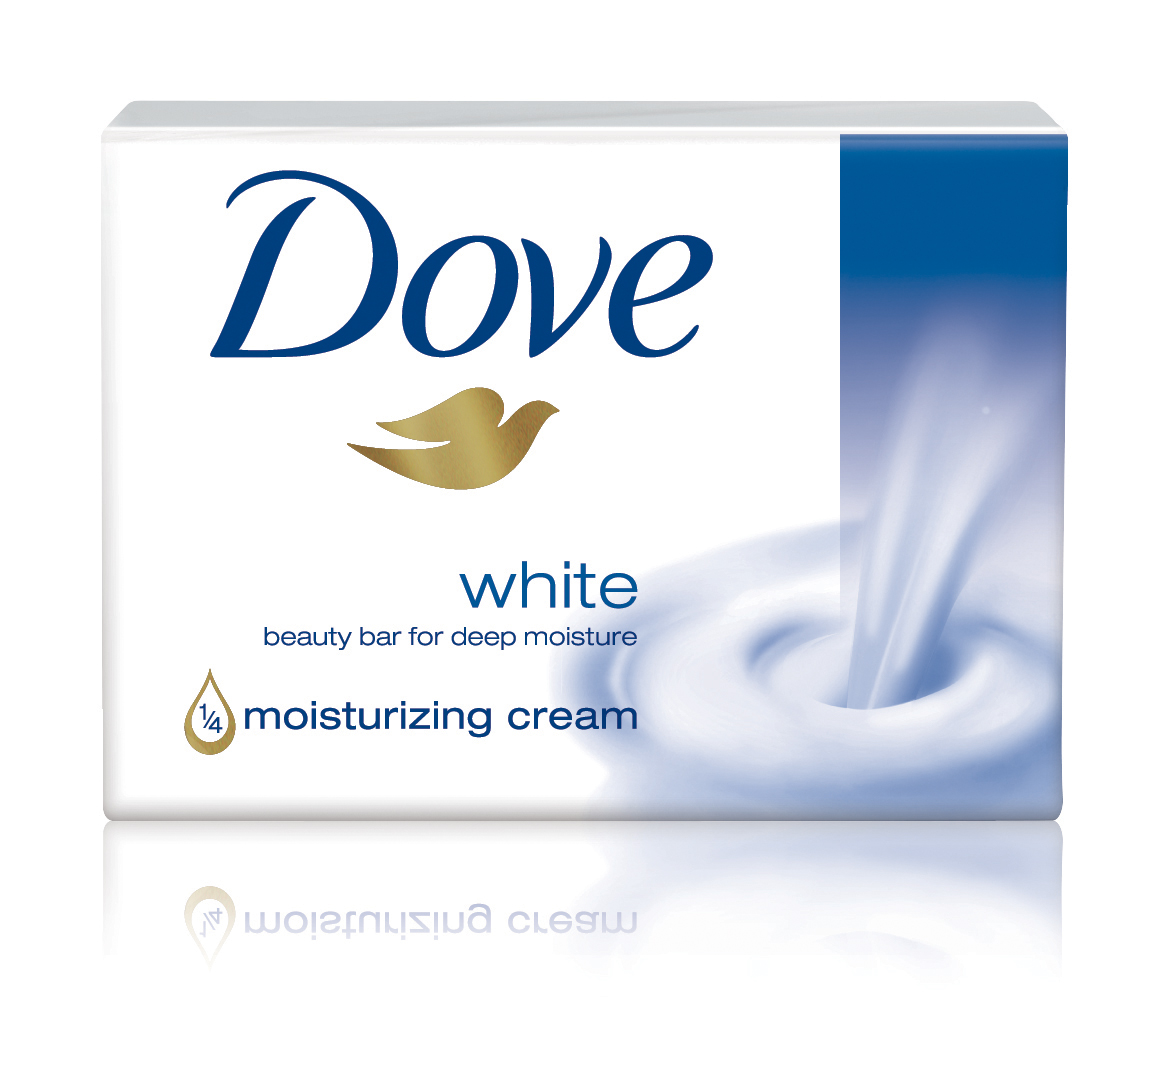 Share Your Dove Beauty Story!